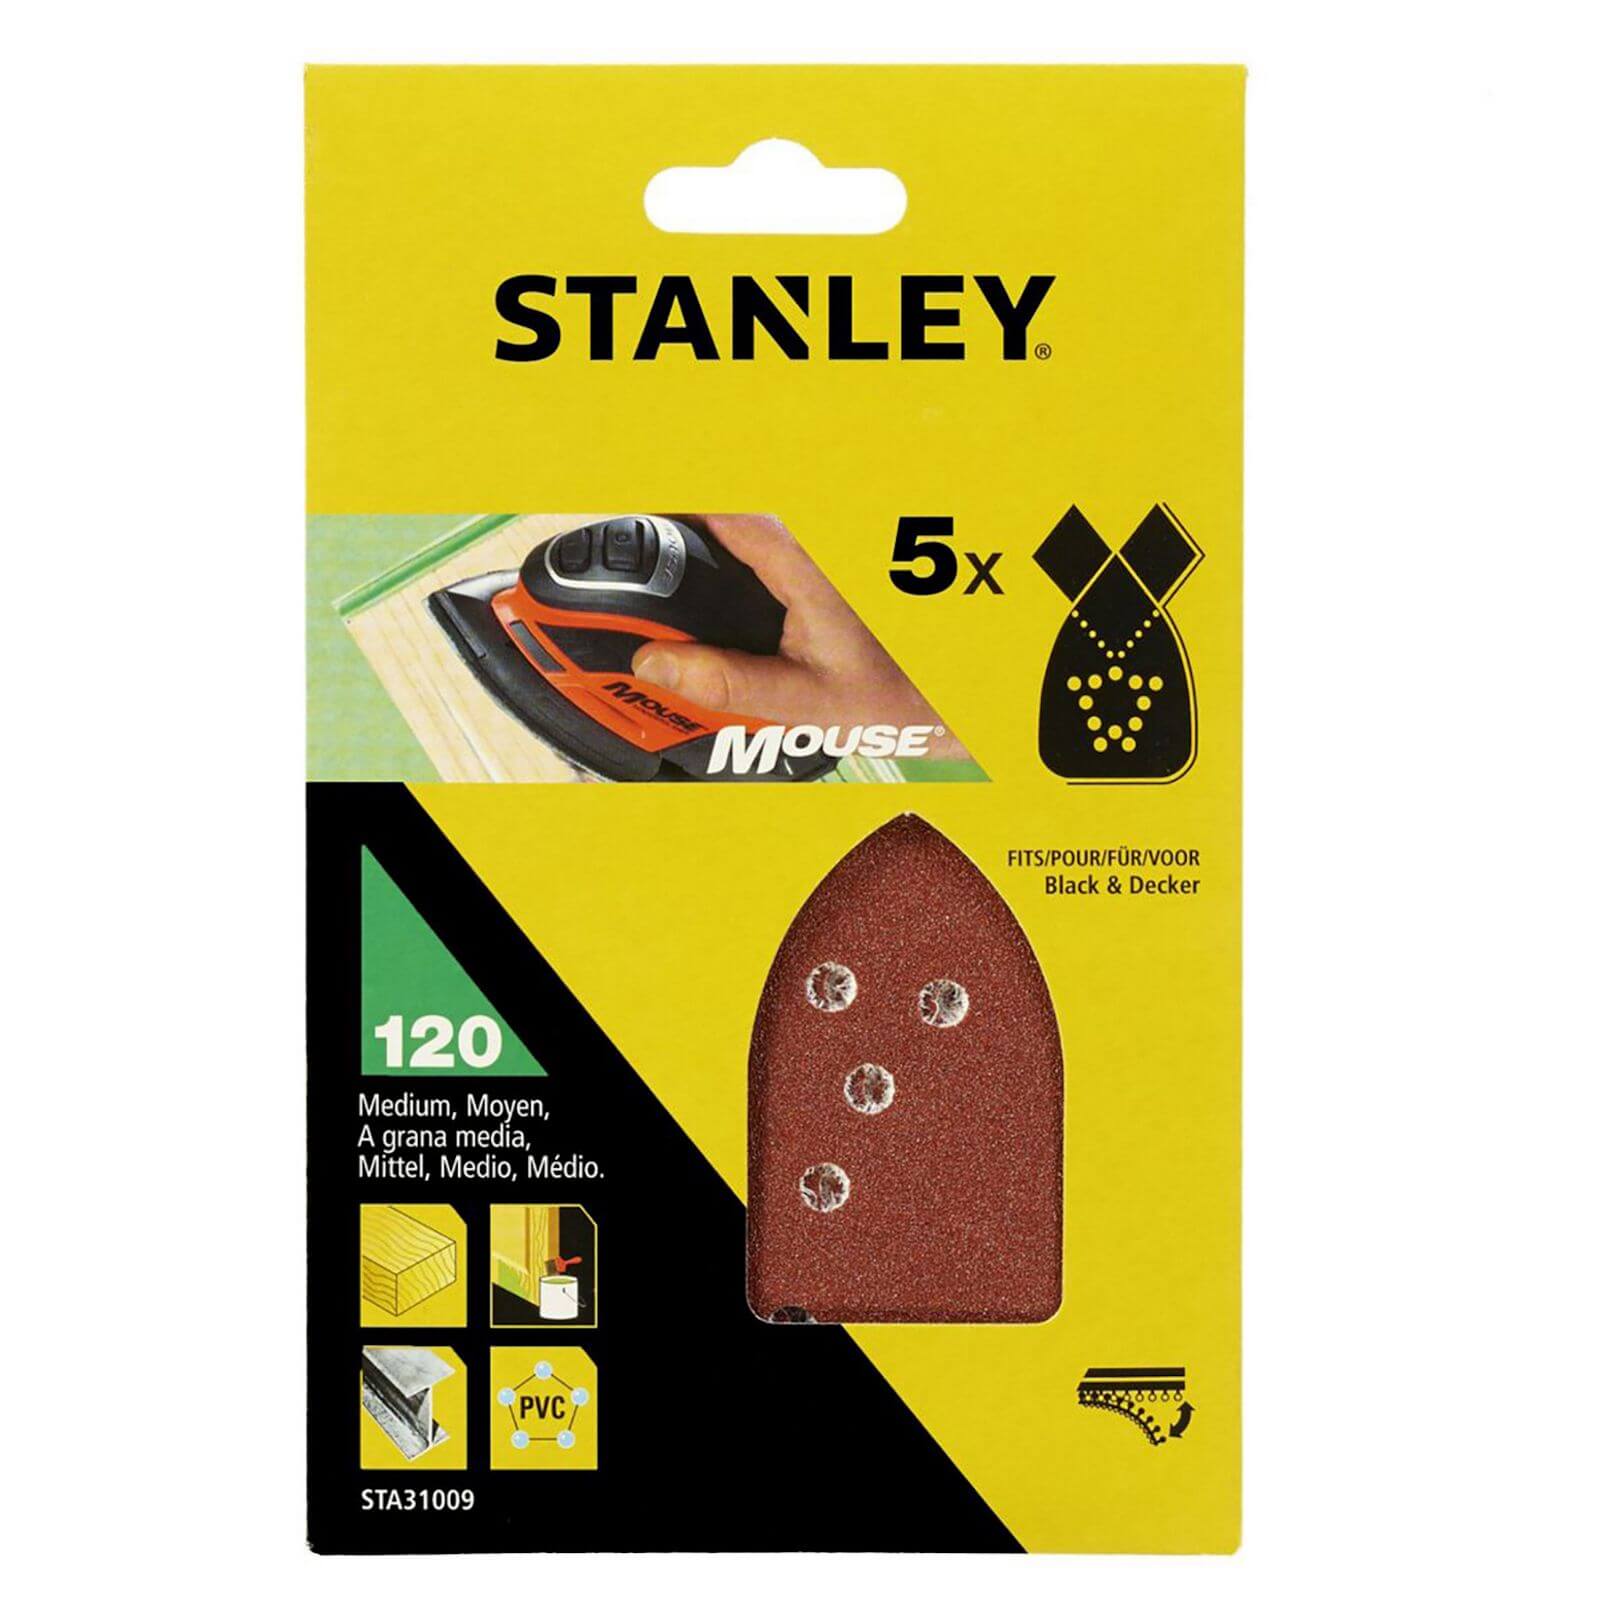 Photo of Stanley Mouse Sanding Sheets 120g - Sta31009-xj